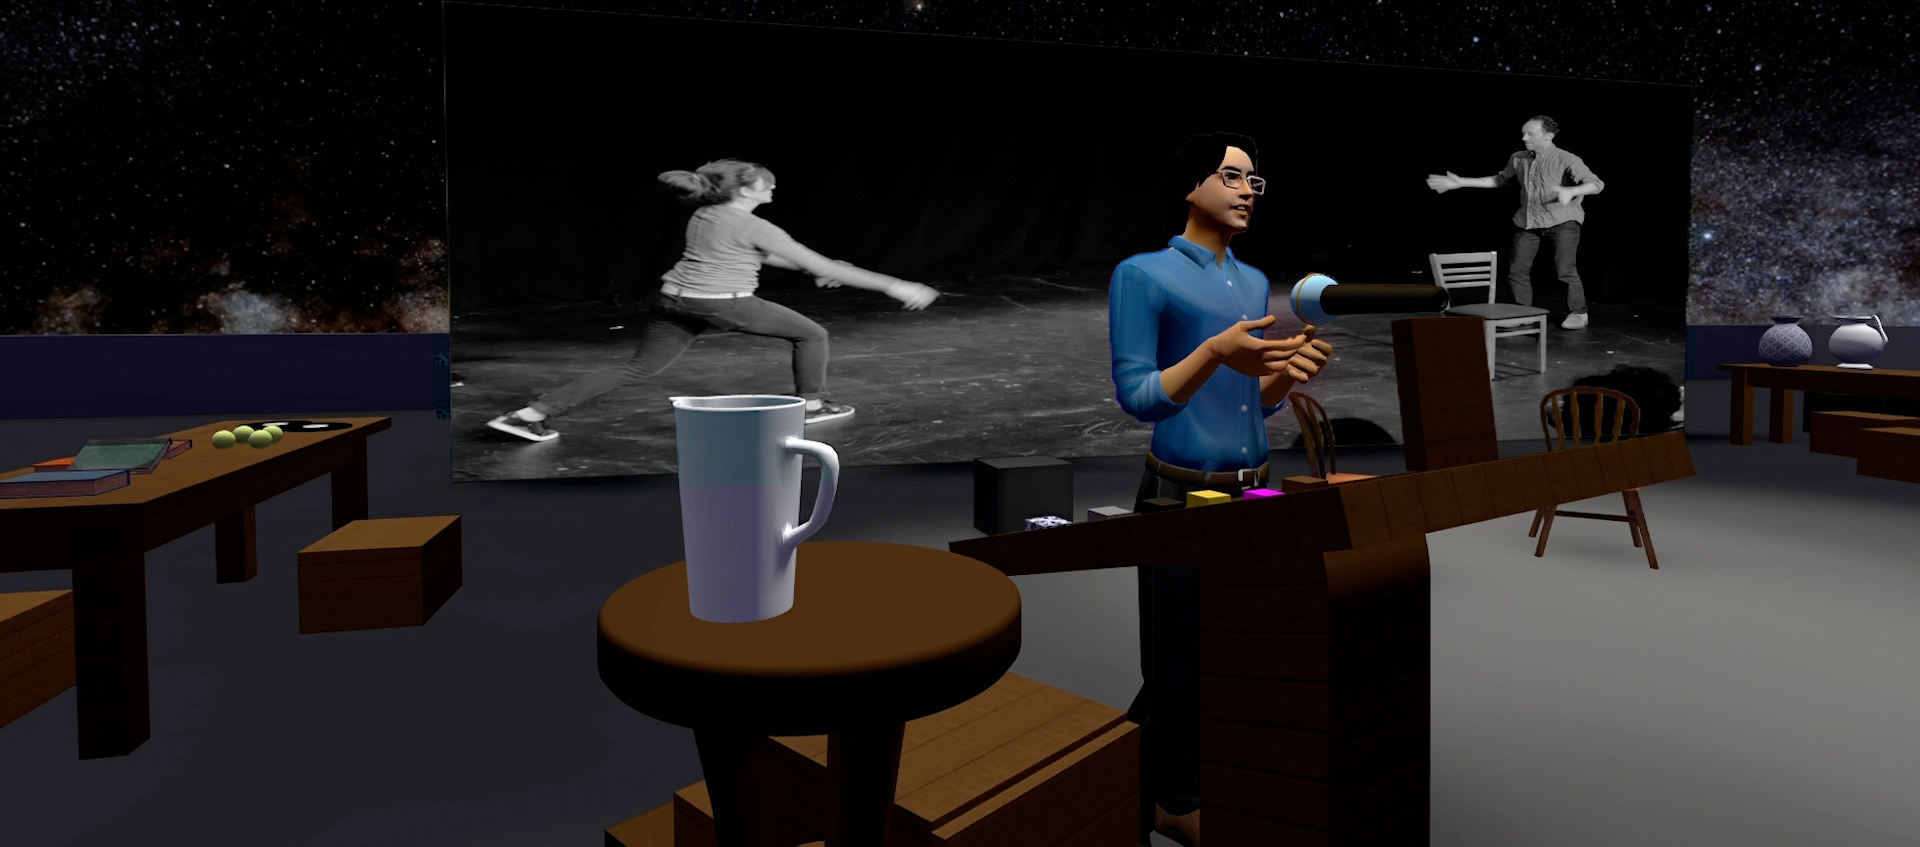 In a computer-animated still a person in a blue shirt and glasses seems to speak into a microphone on a virtual stage; a photograph of two actors interacting is in the background